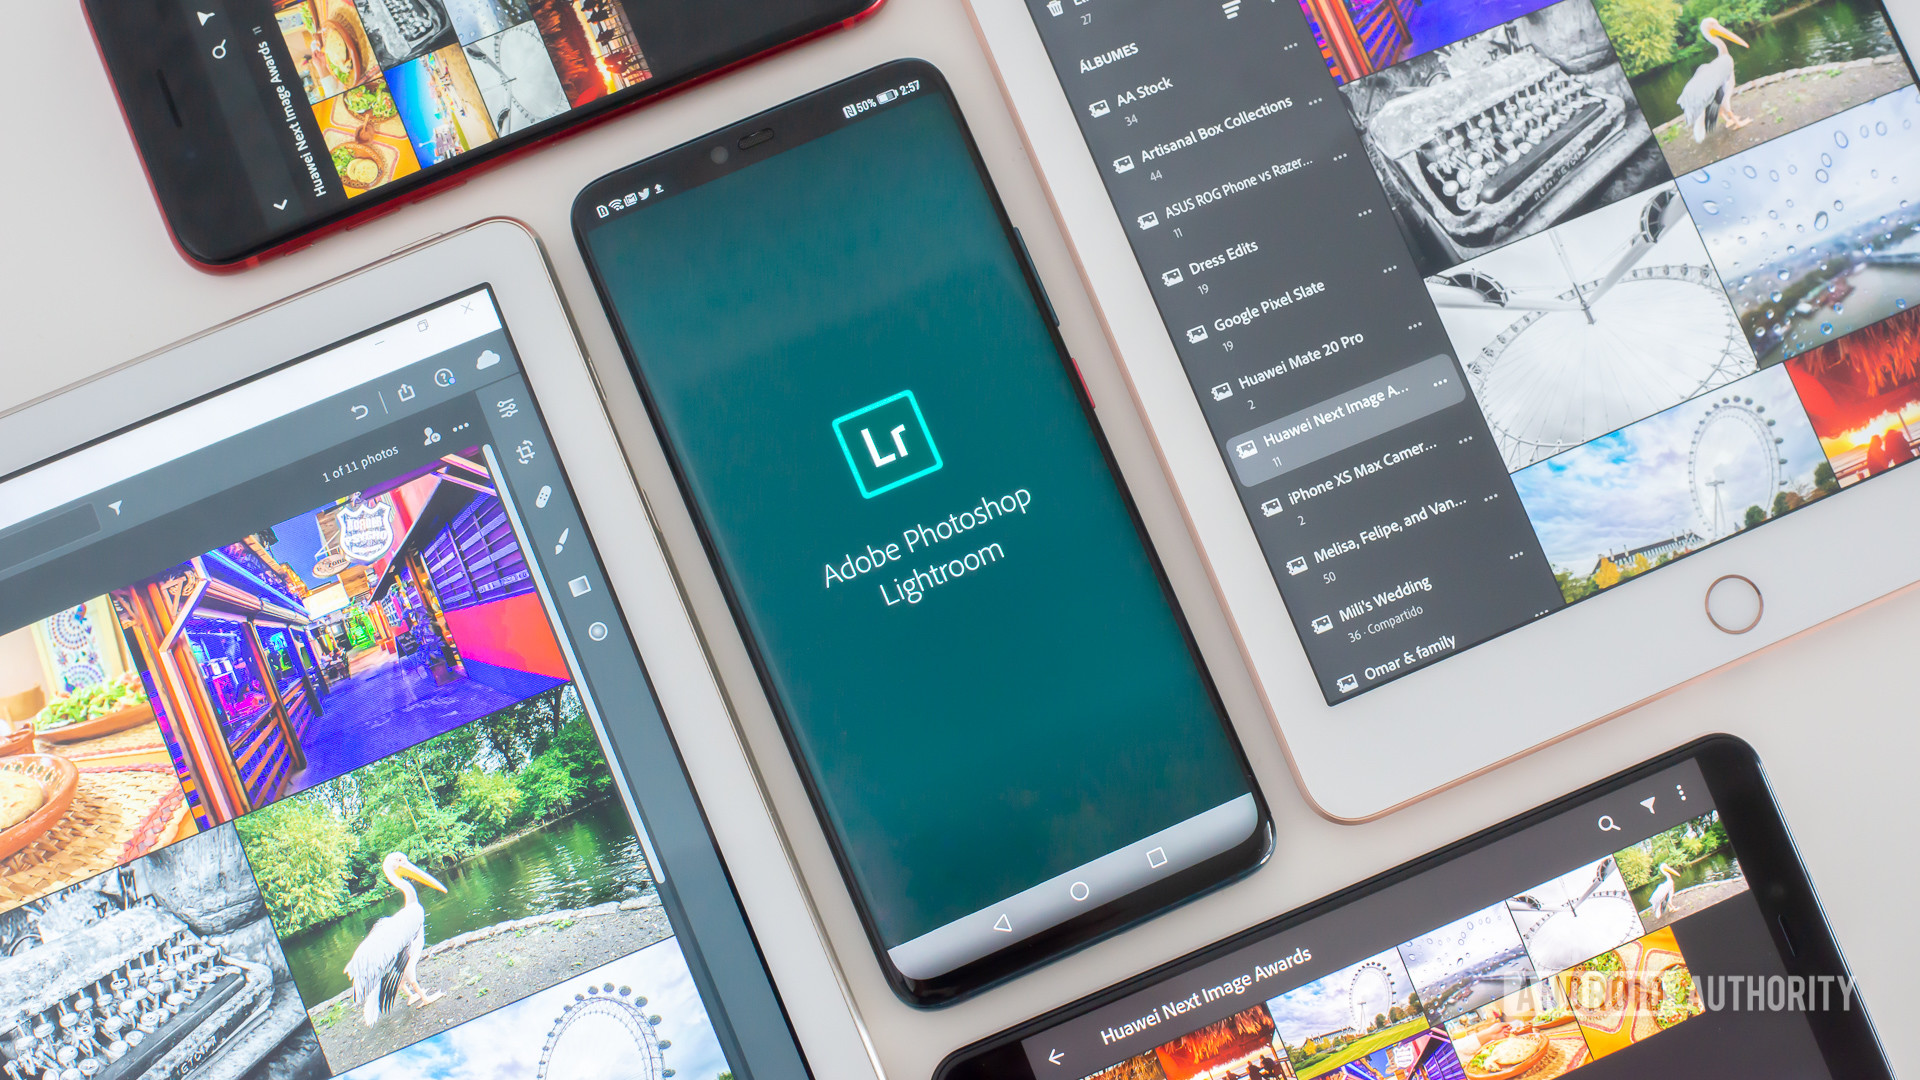 adobe photoshop lightroom to edit photos on android